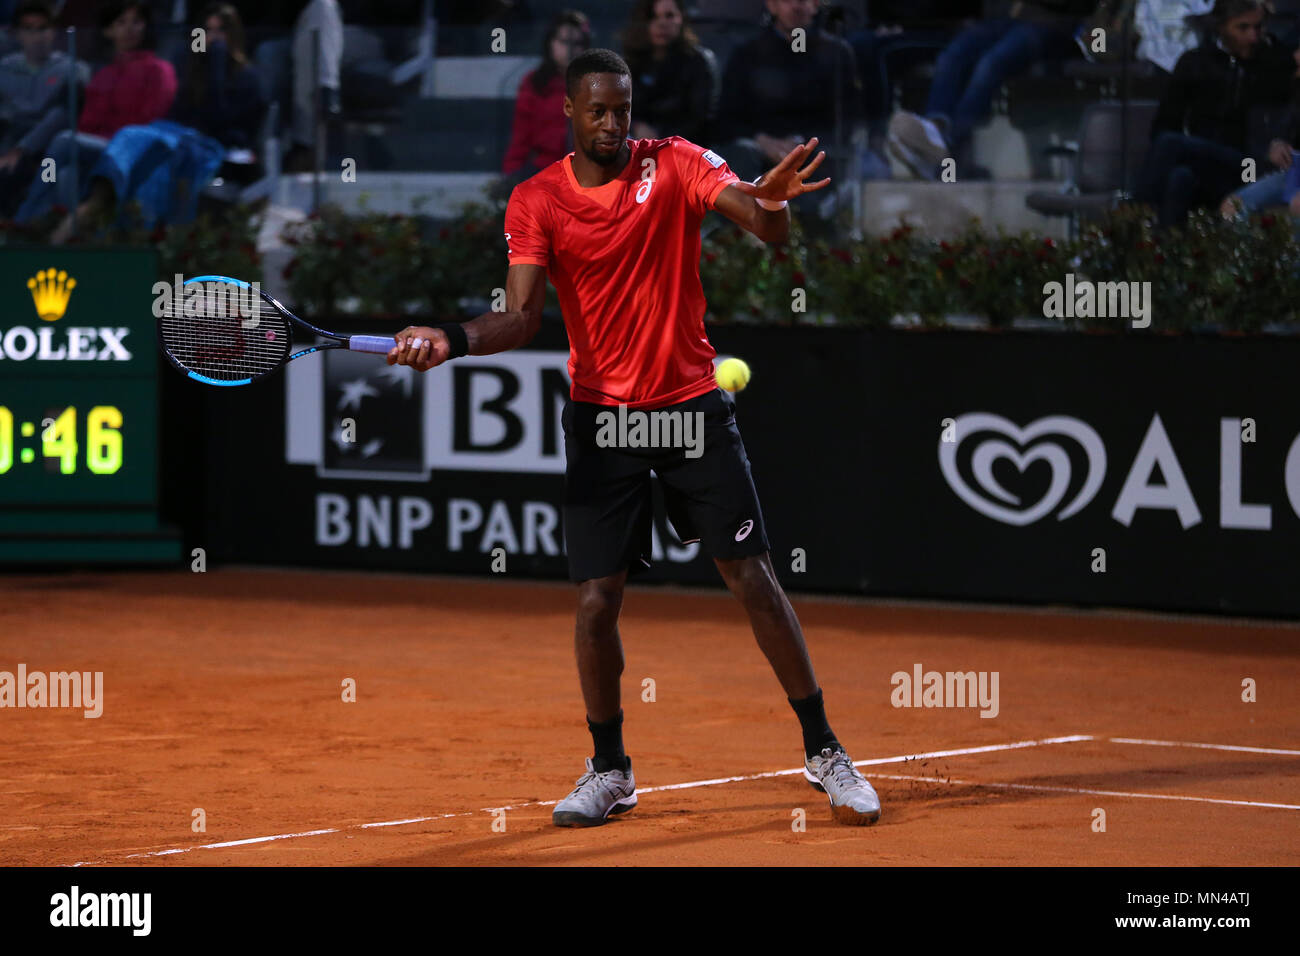 Foro Italico, Rome, Italy. 14th May, 2018. Italian Open Tennis; Gael  Monfils (FRA) in action during